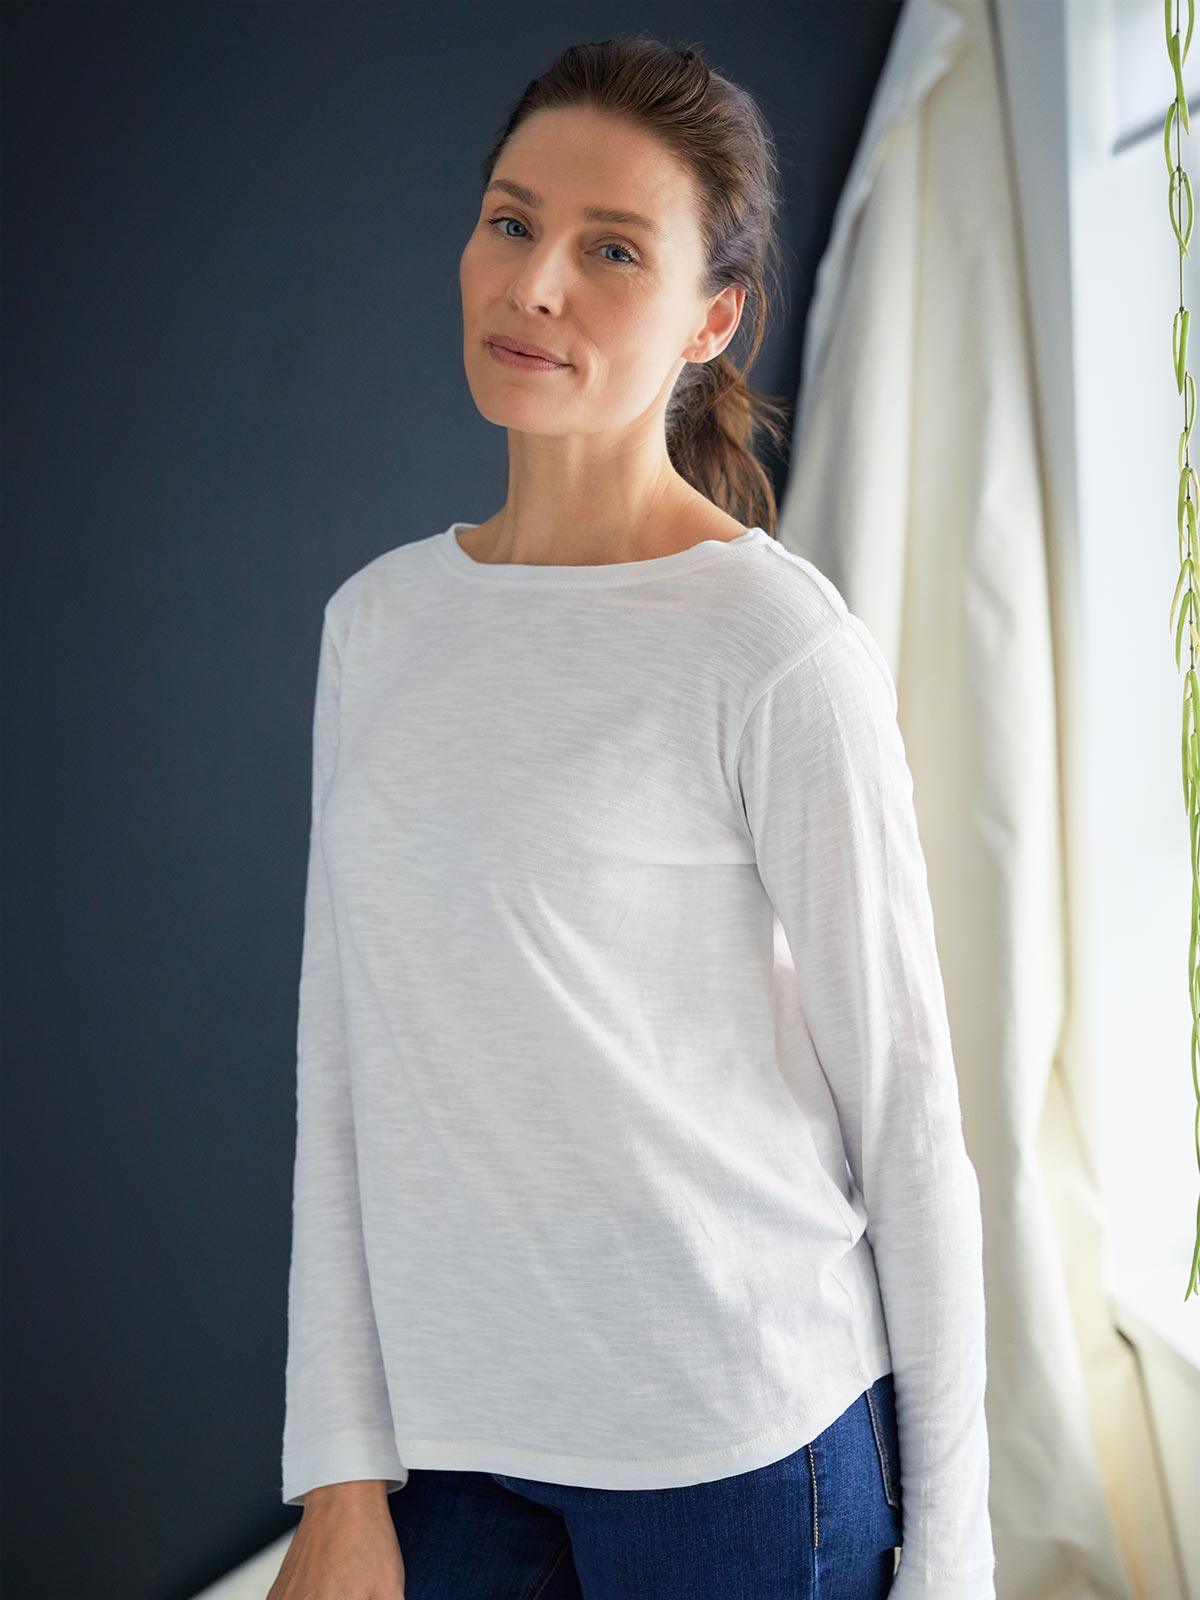 Fairtrade Organic Cotton Long Sleeve Top - Thought Clothing UK